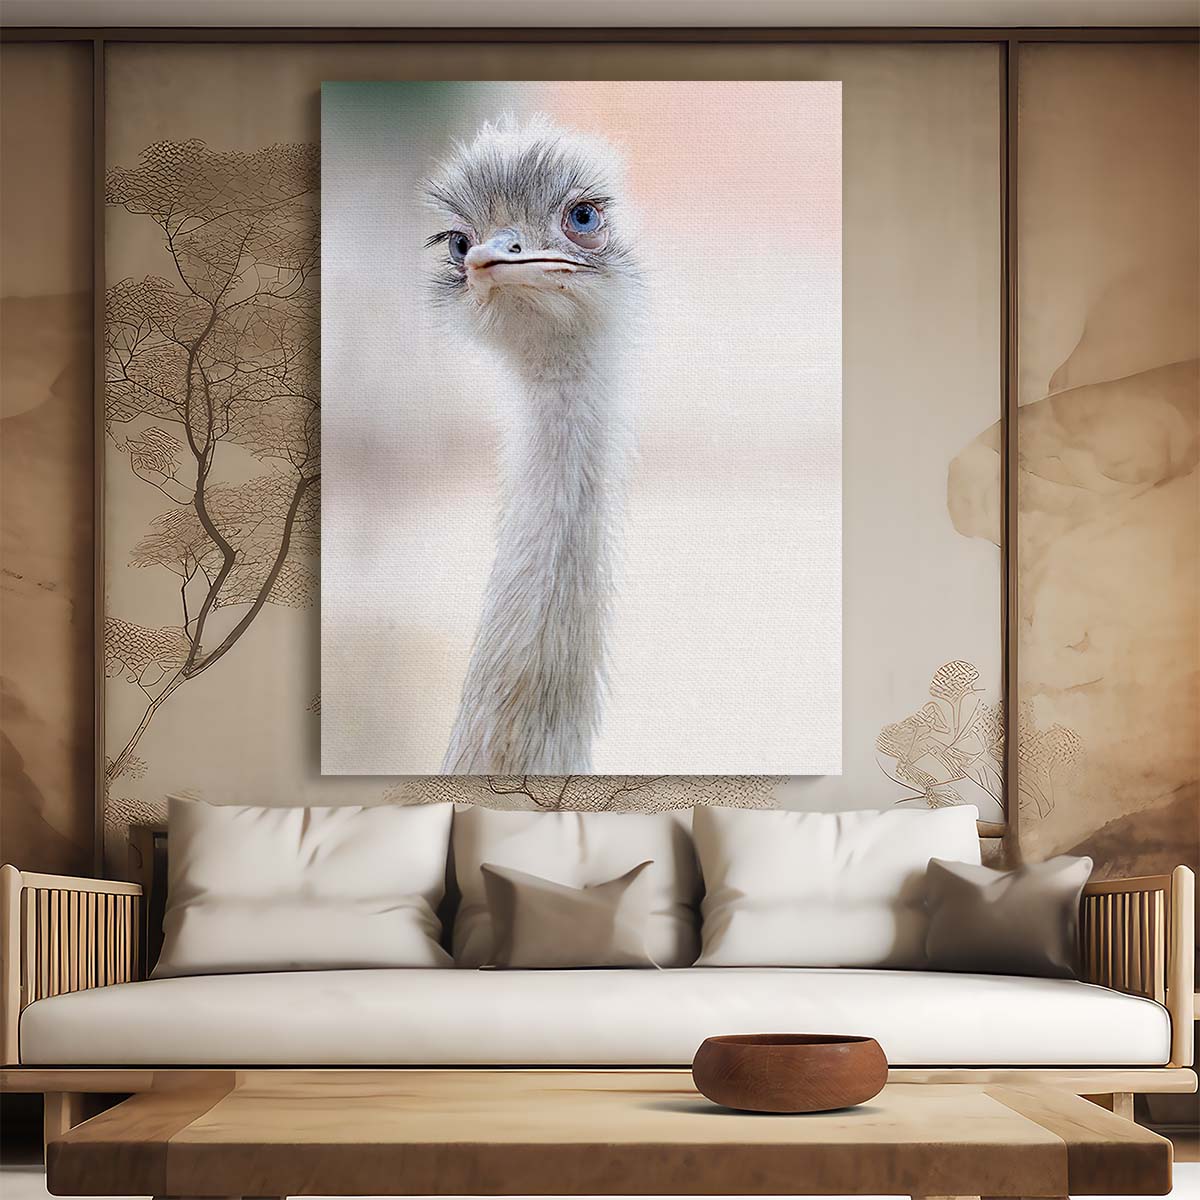 Bokeh Photography Ostrich Bird Animal Portrait with Blue Eyes by Luxuriance Designs, made in USA